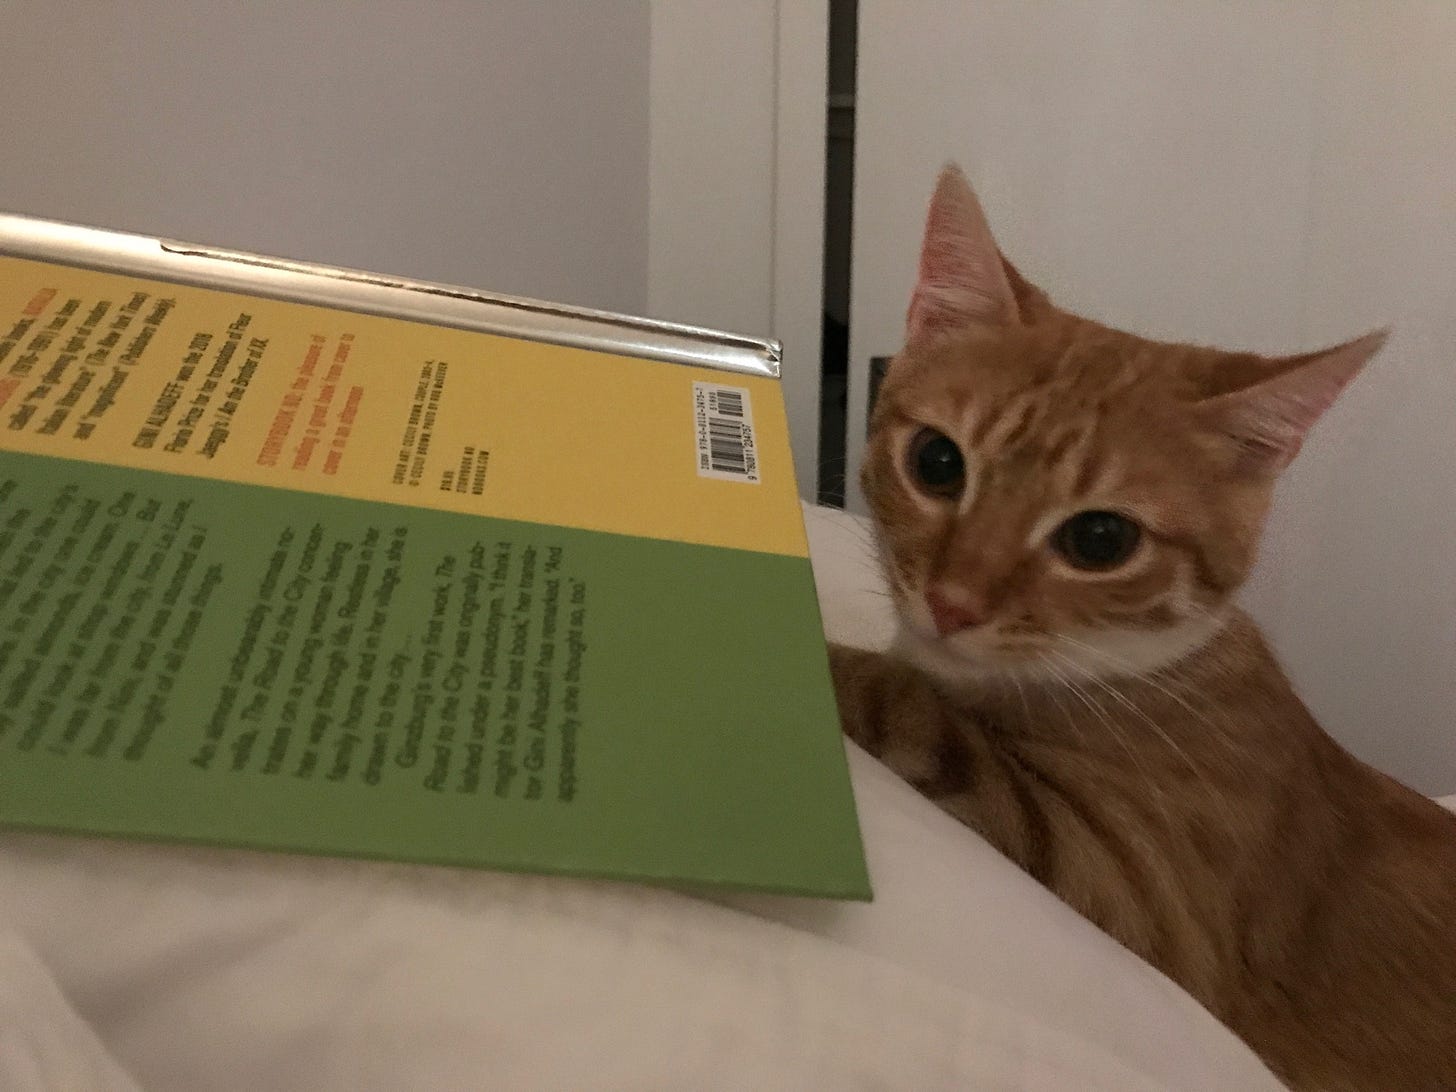 An orange and white cat is next to an opened, face-down book. The cat looks at the camera as if her reading has just been interrupted.